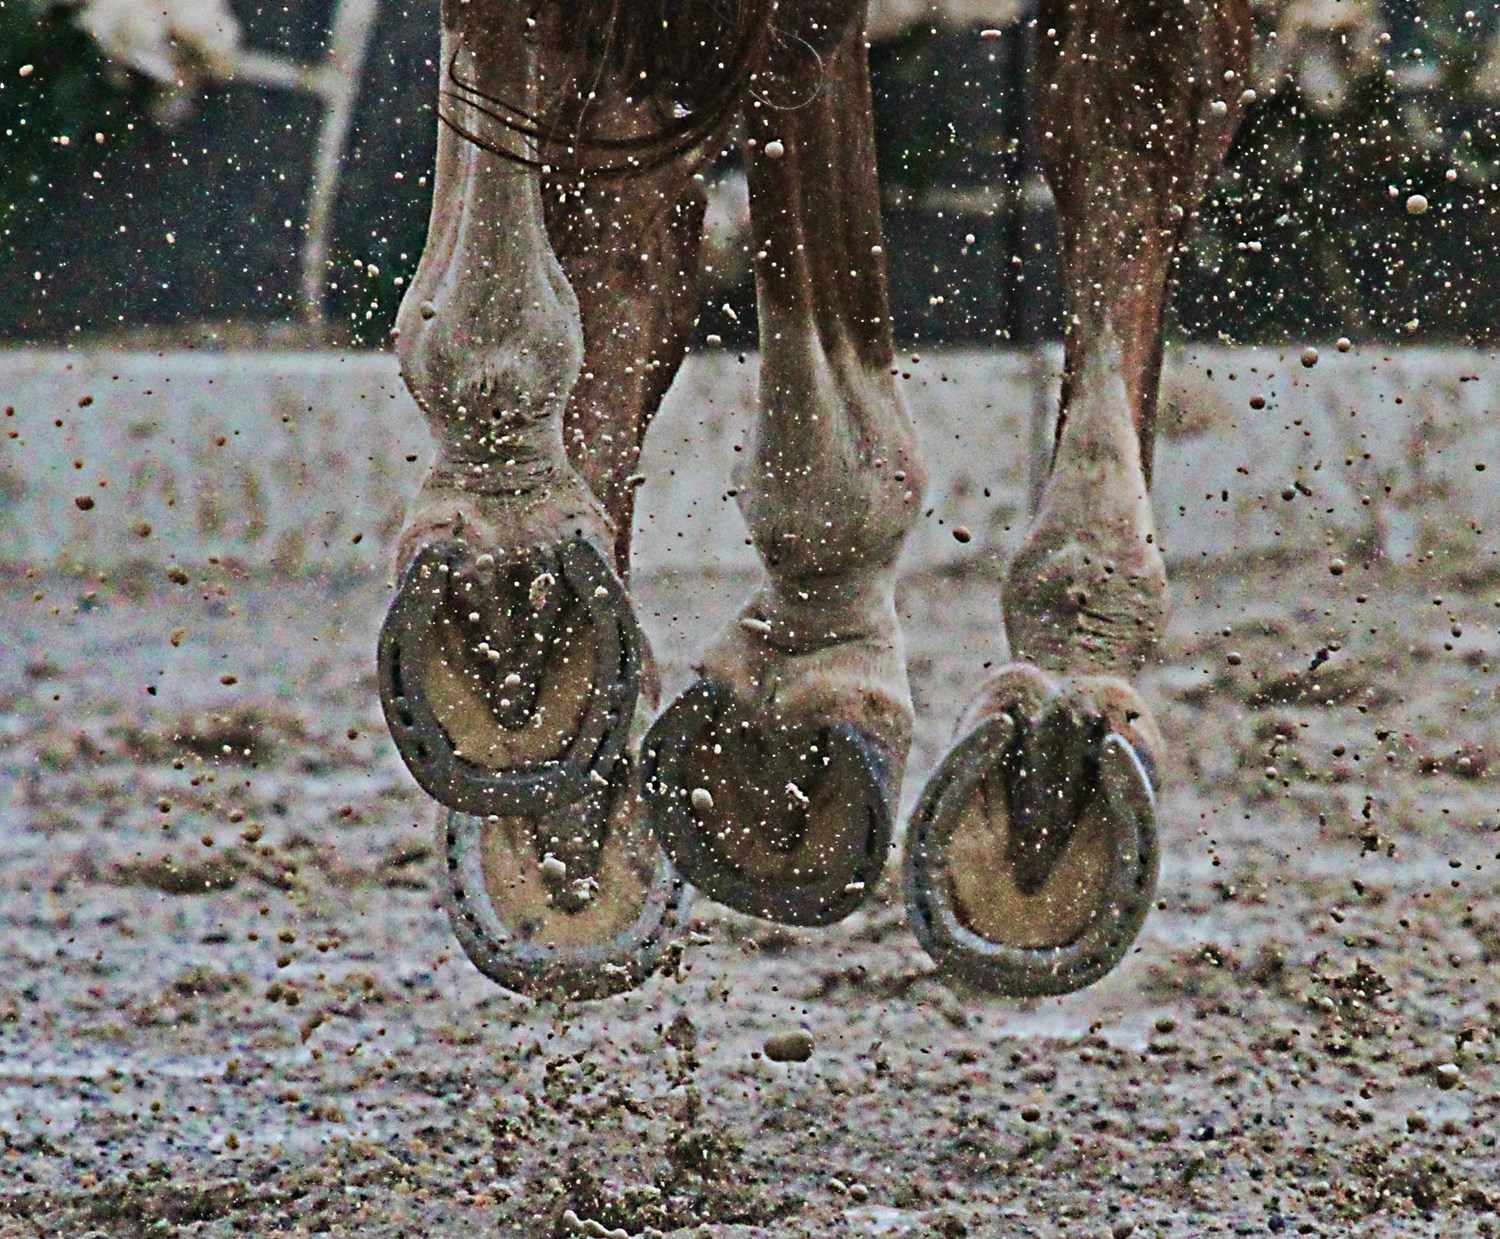 Ten Hoof Care Tips To Help Keep Your Horses Hooves Healthy And Strong